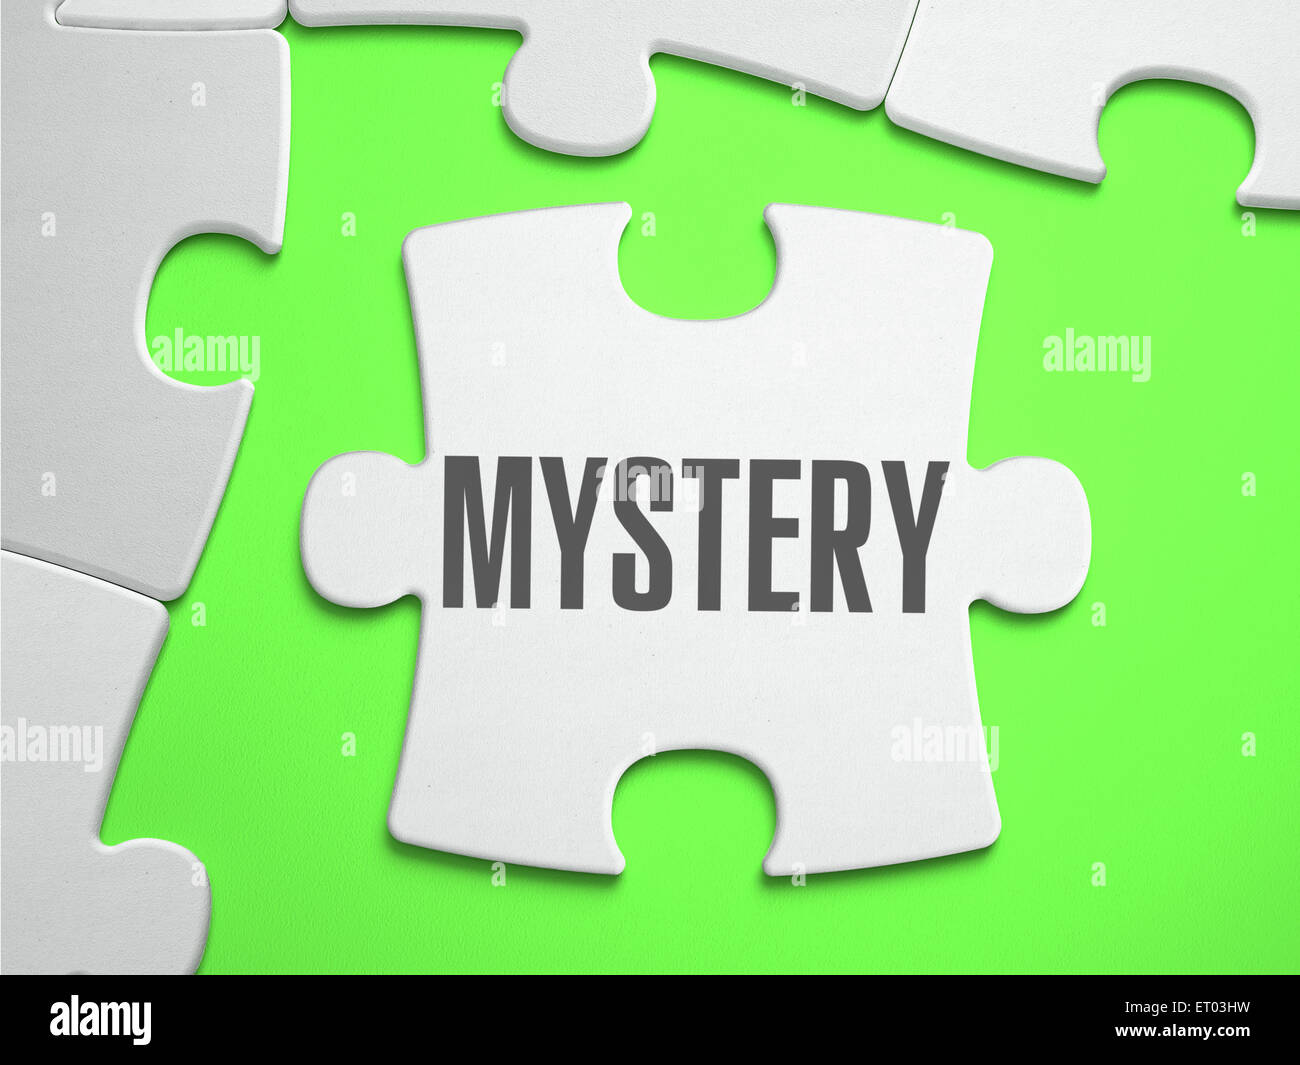 Mystery - Jigsaw Puzzle with Missing Pieces. Stock Photo